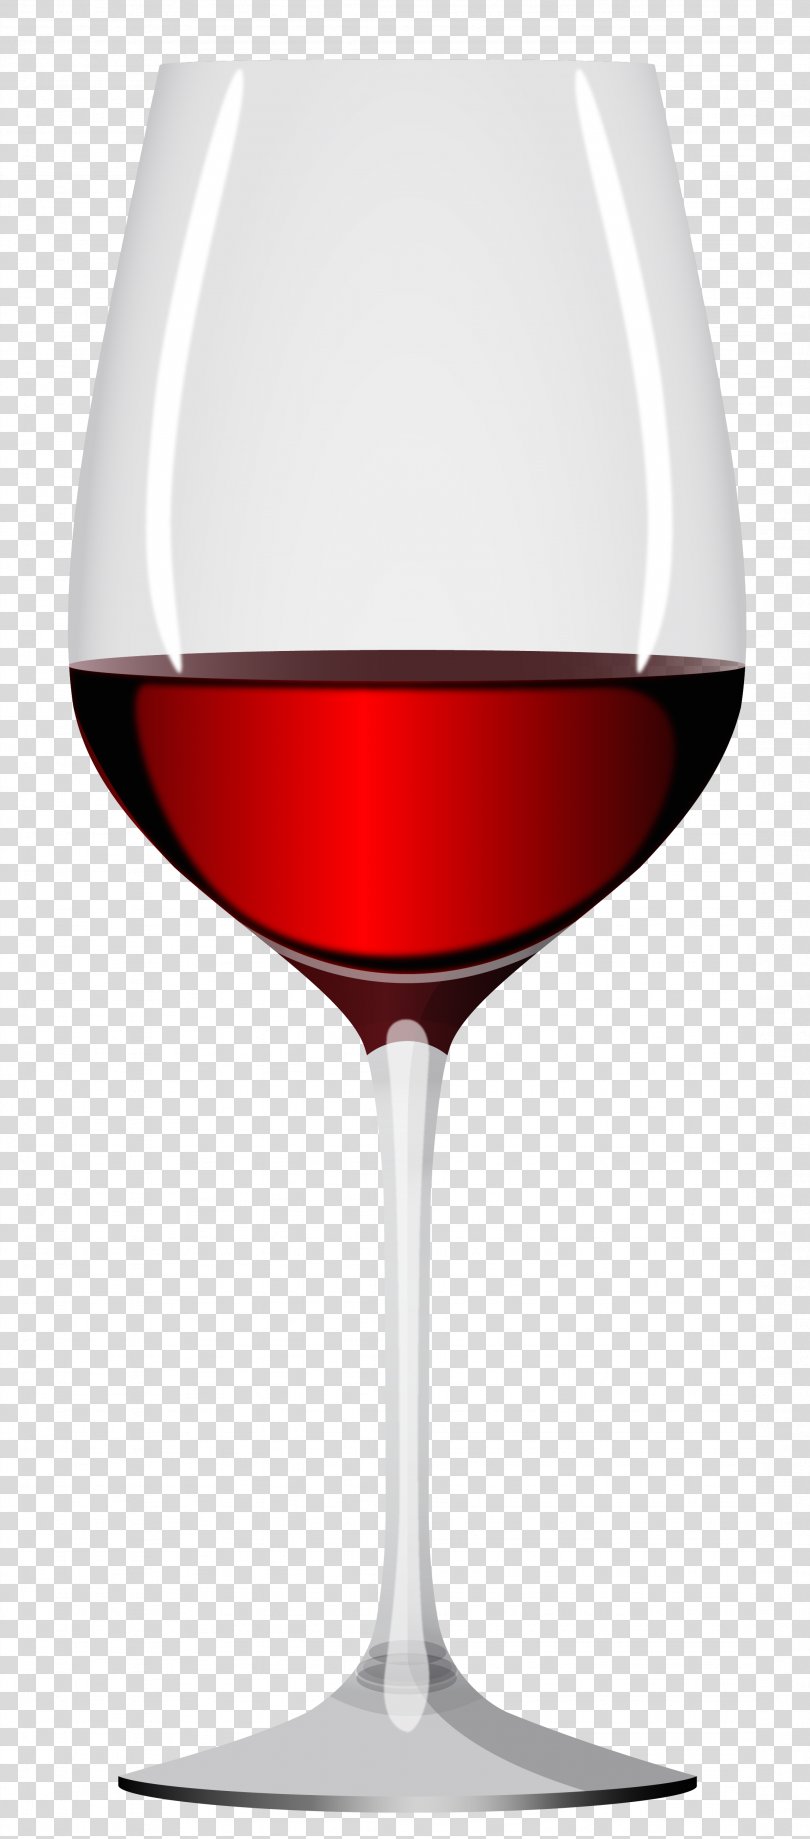 Red Wine Champagne Wine Glass Clip Art, Glass Of Red Wine Clipart Image PNG